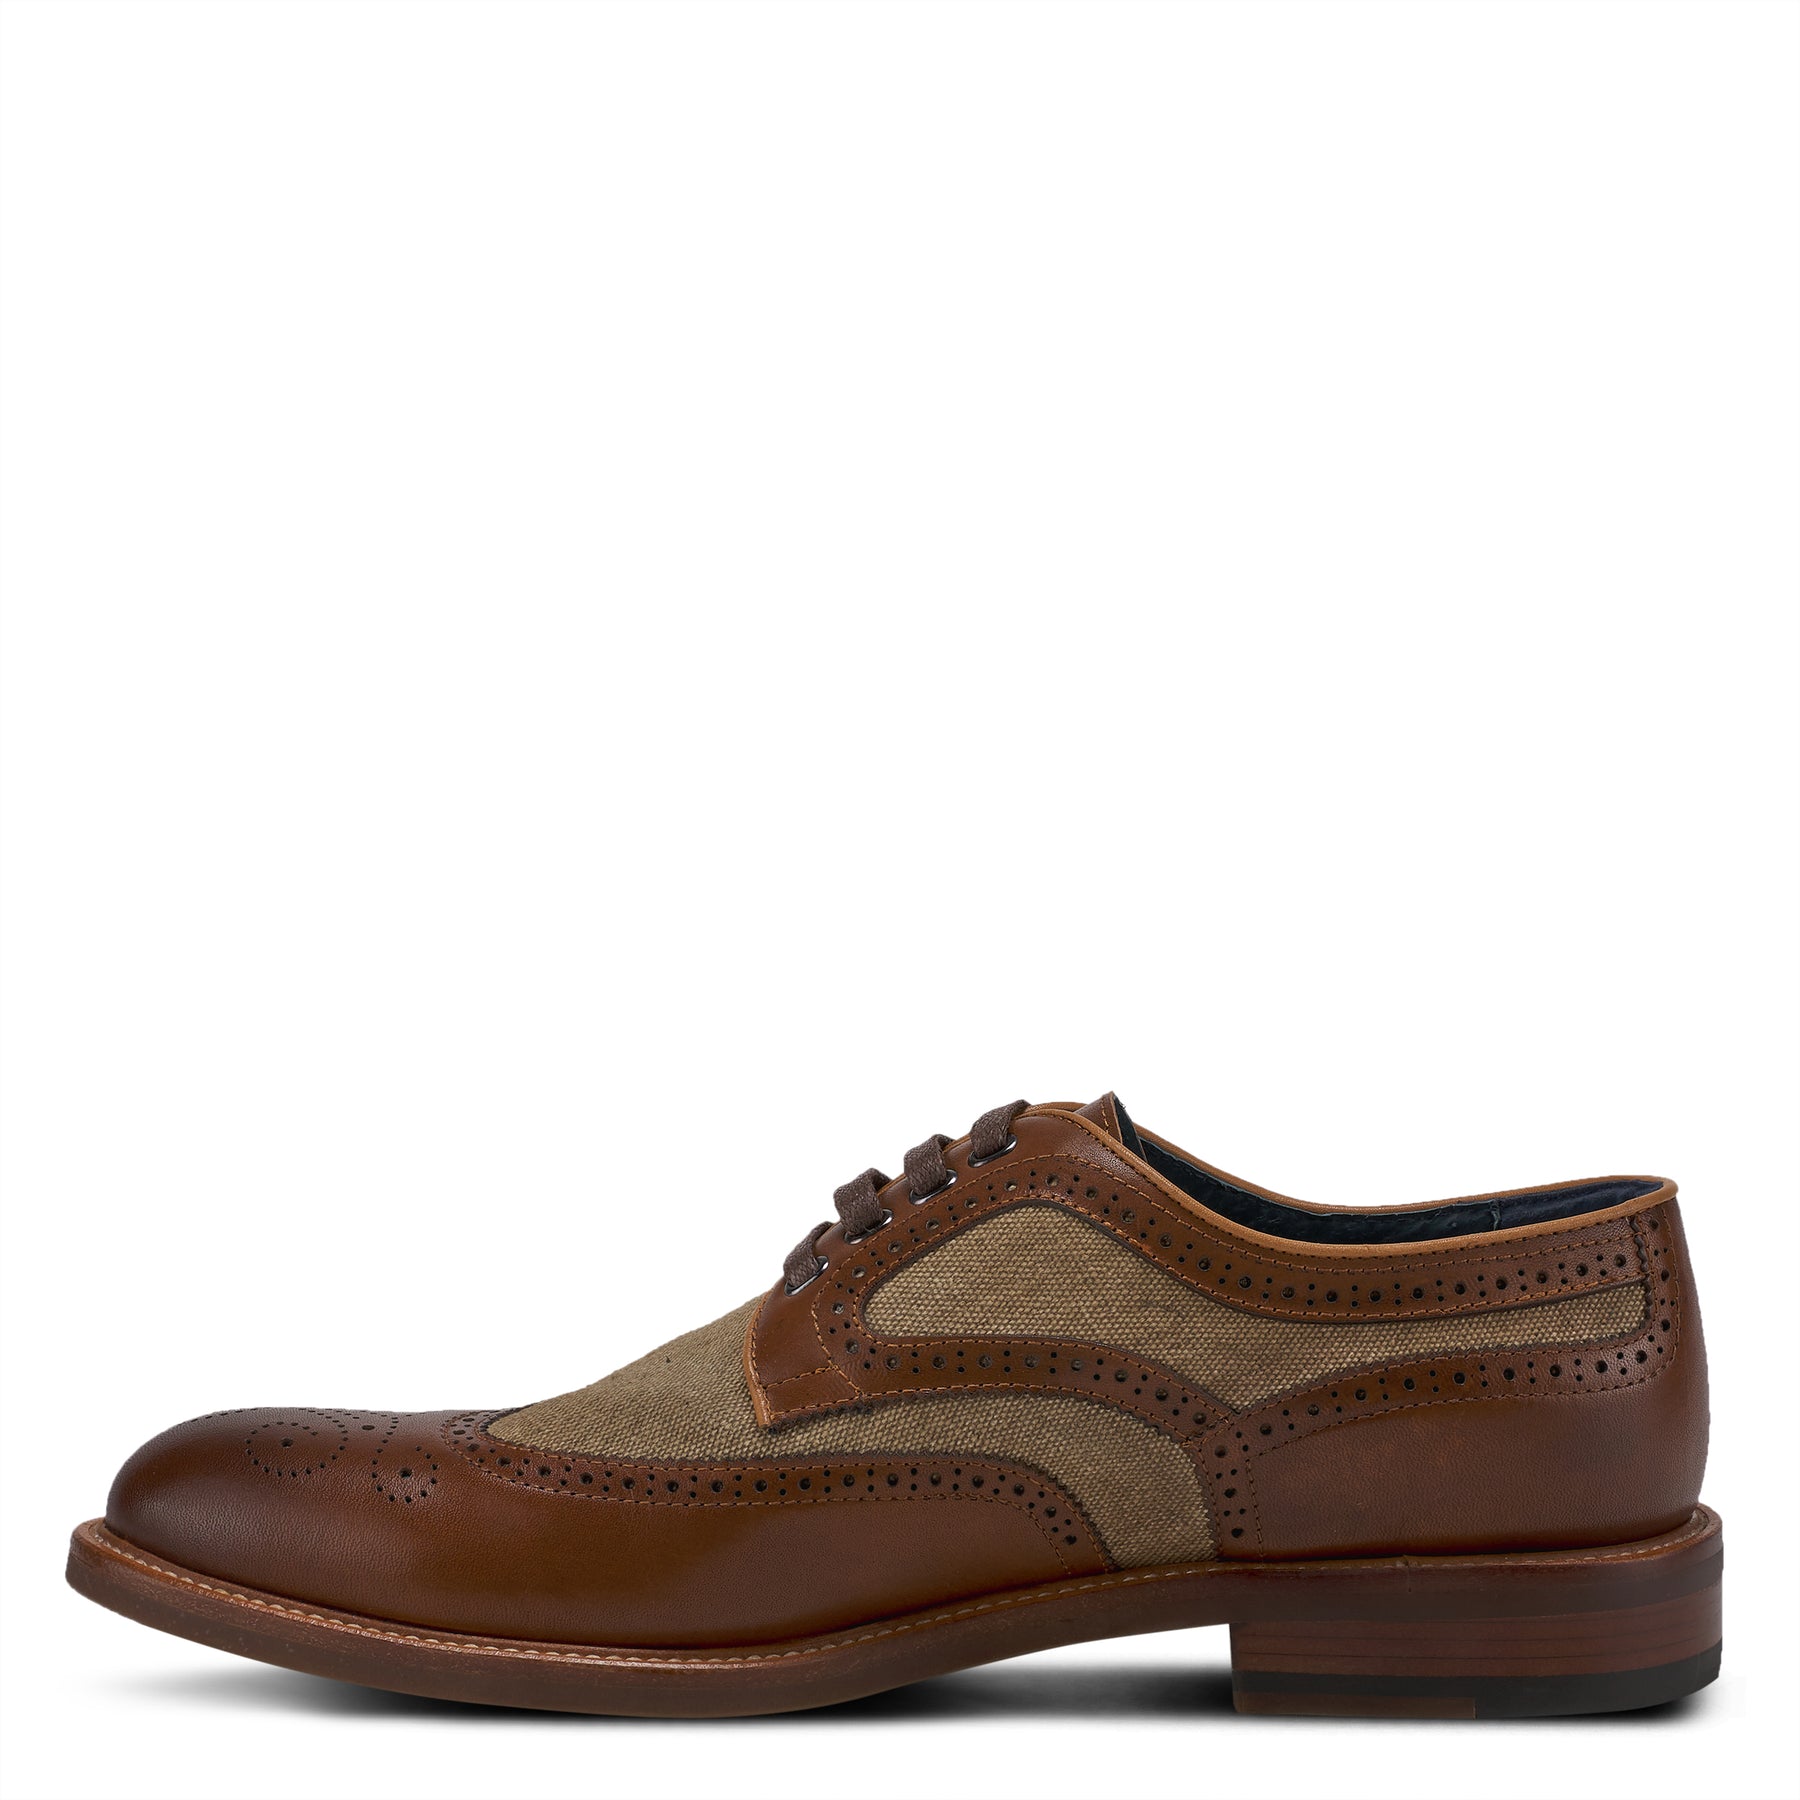 DOWNTOWN MEN'S OXFORD by SPRING STEP MEN – Spring Step Shoes